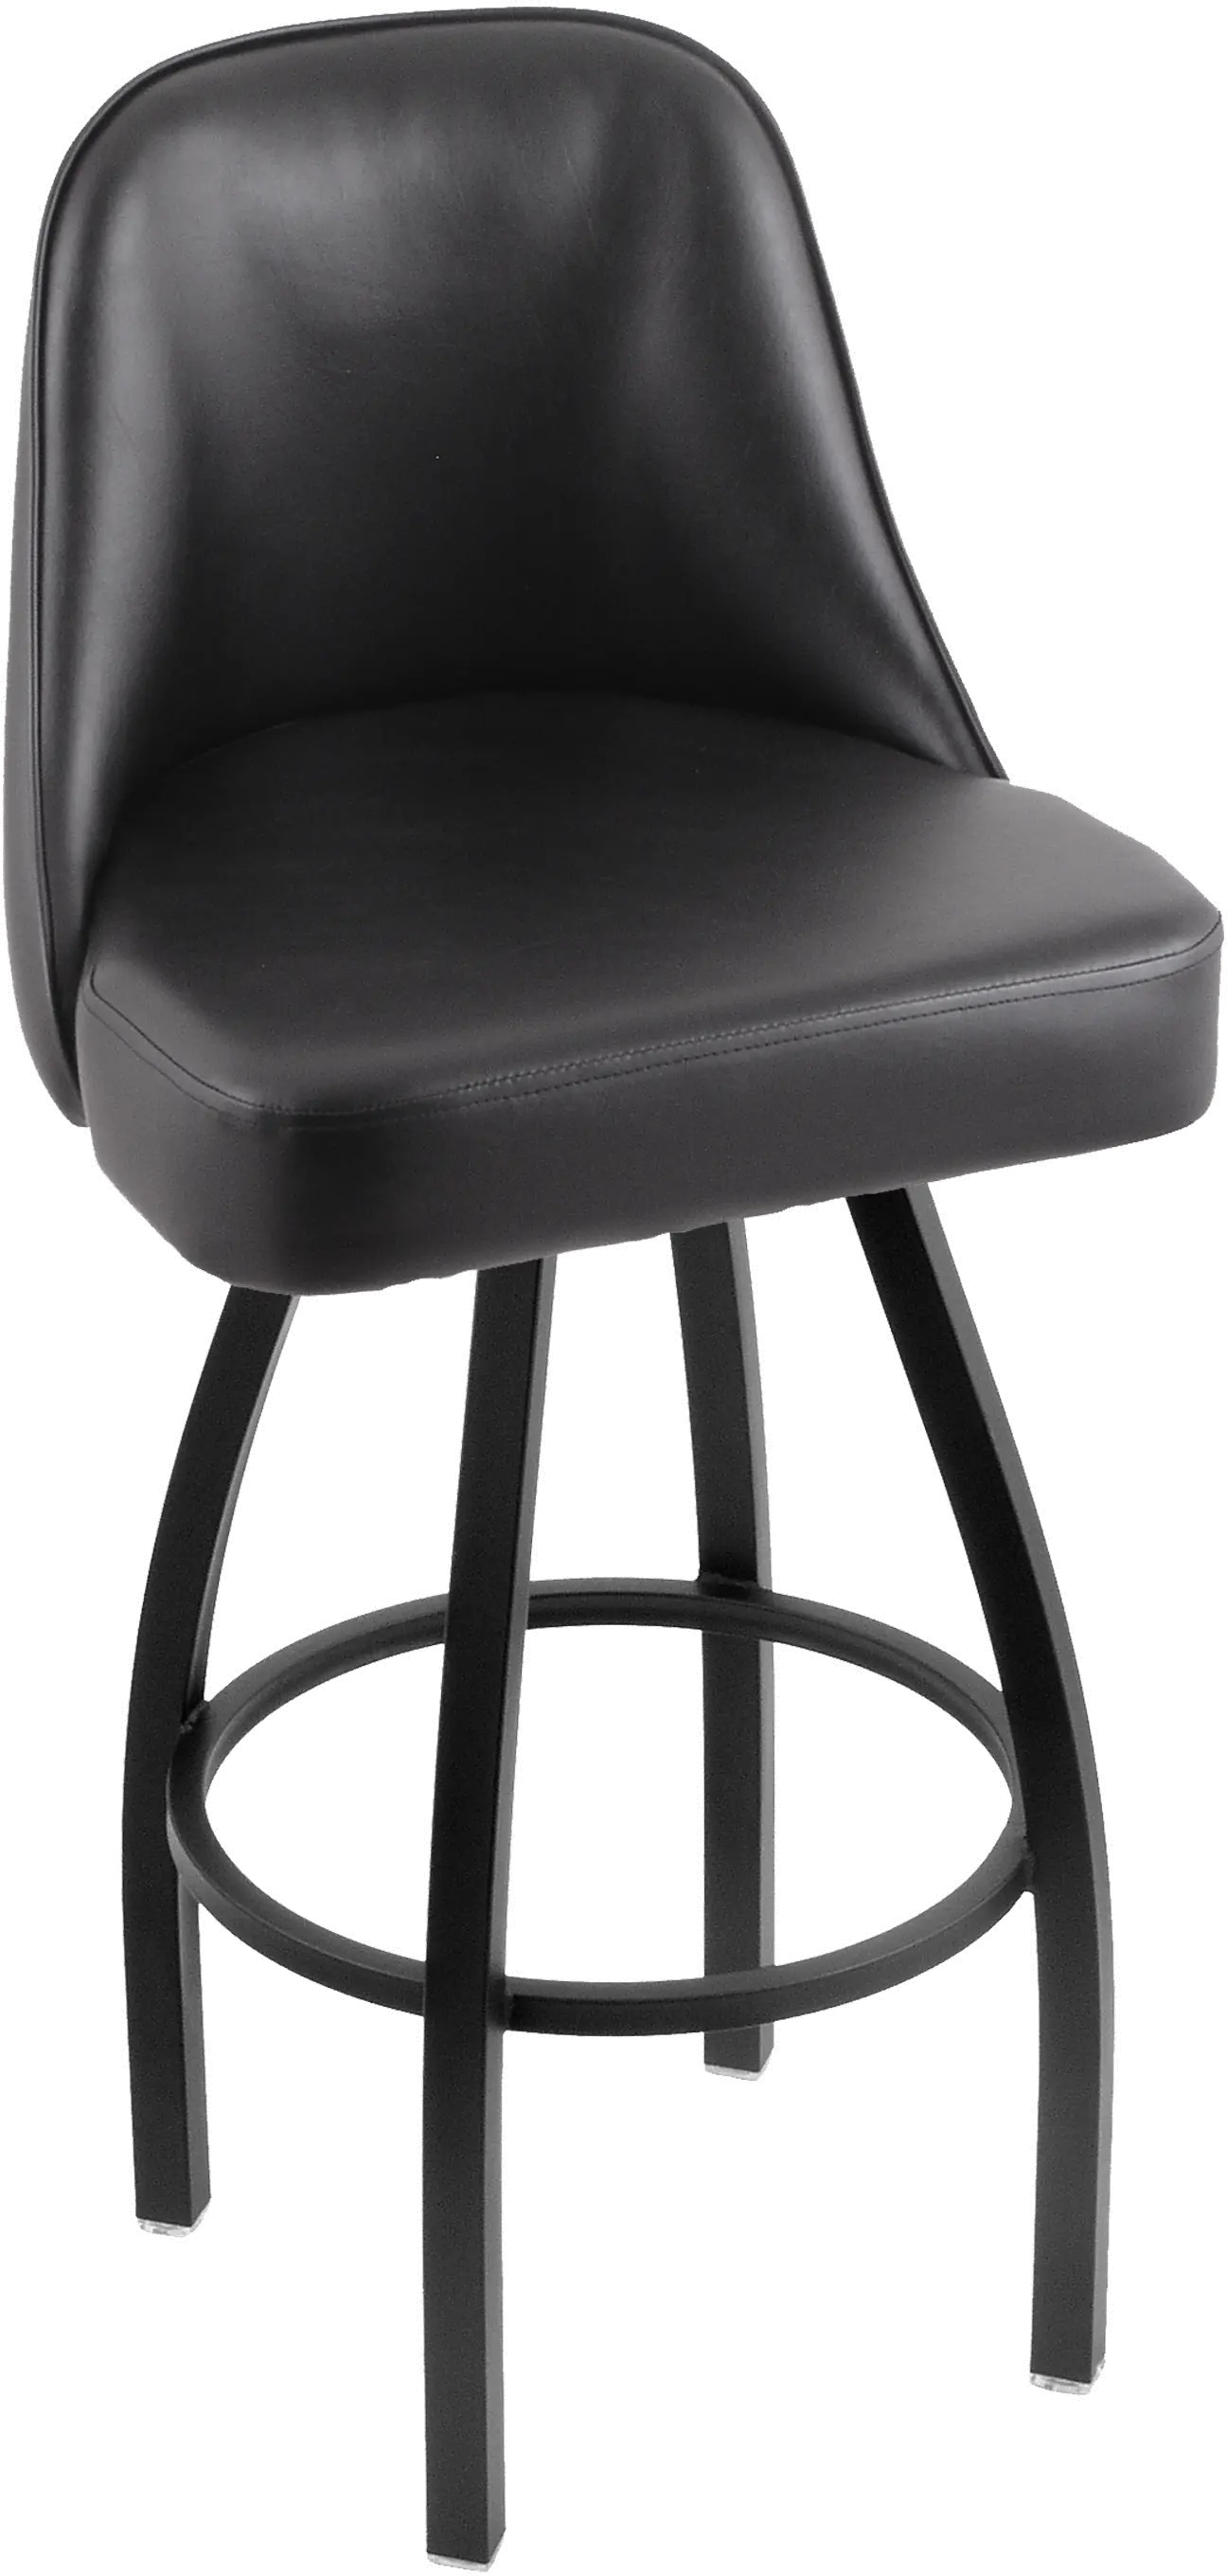 Grizzly Black Metal Upholstered Swivel Bar Stool